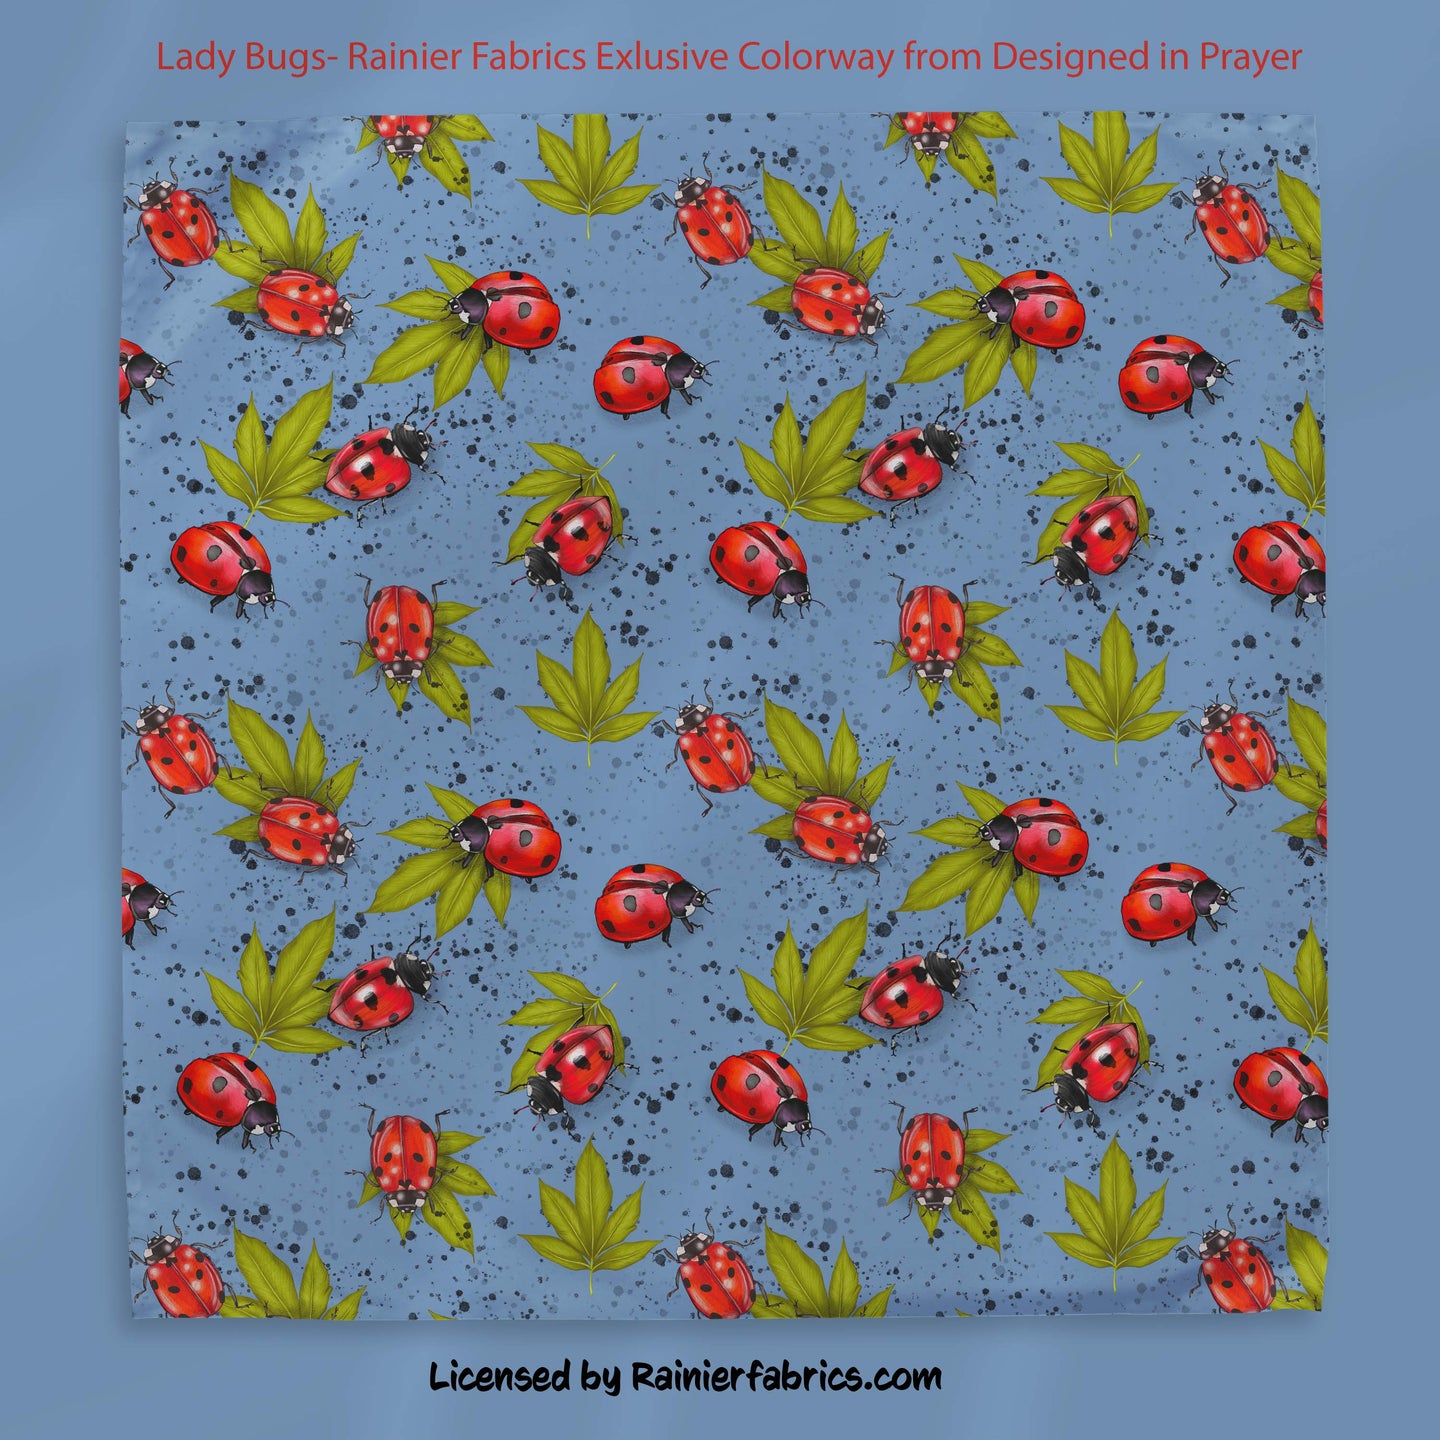 Lady Bugs on Blue - Exclusive Colorway - from Designed in Prayer - 2-5 business days to ship - Order by 1/2 yard